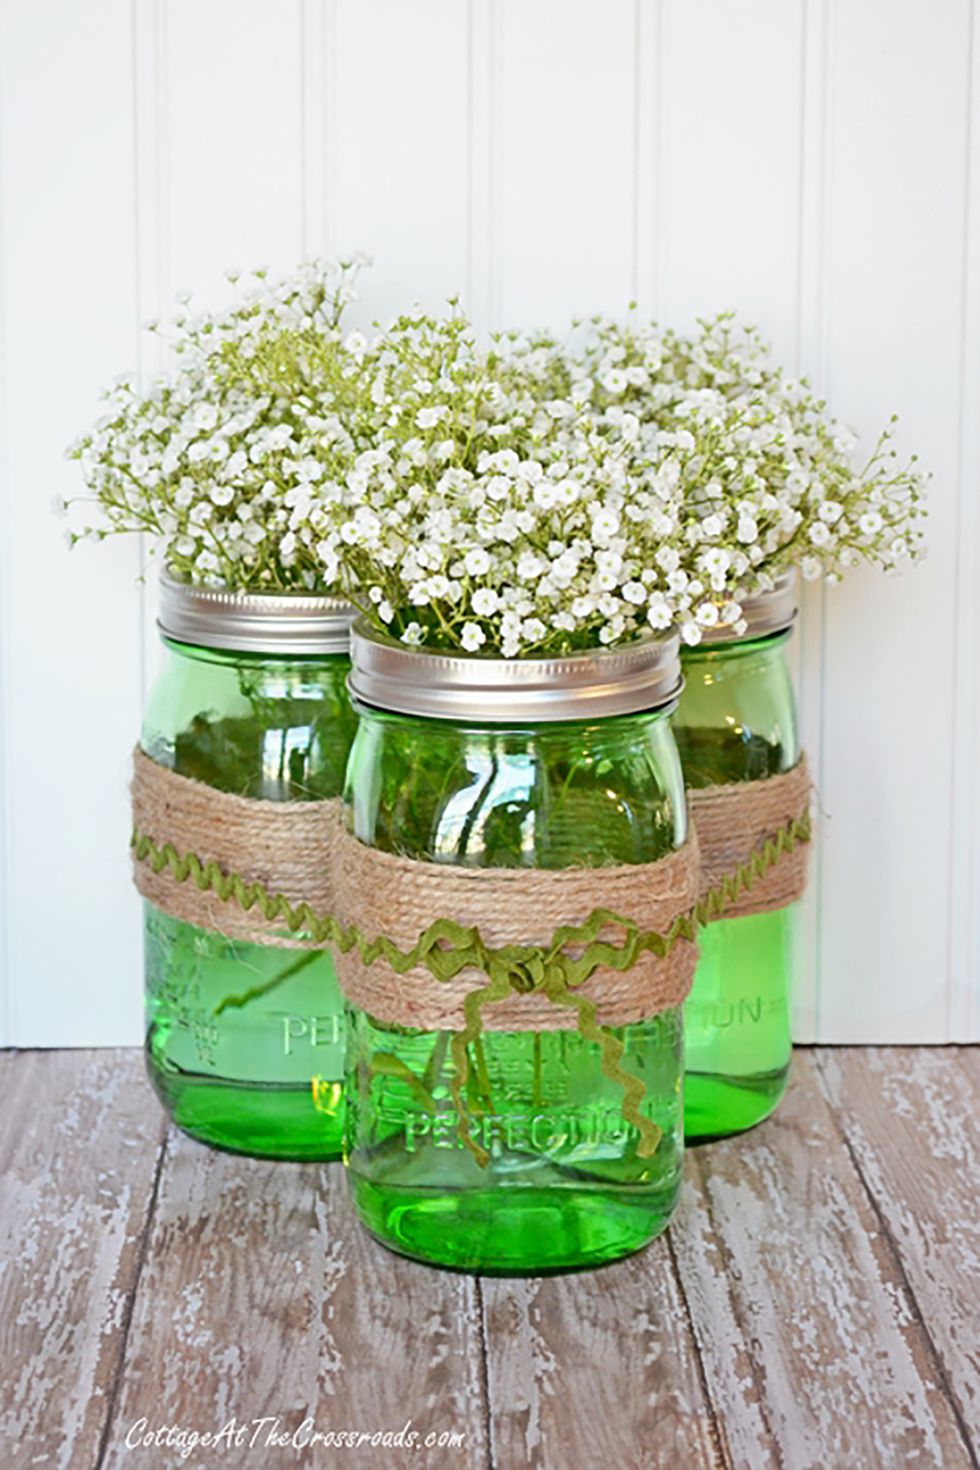 15 Masterful DIY St. Patrick's Day Decor Projects You Must Craft